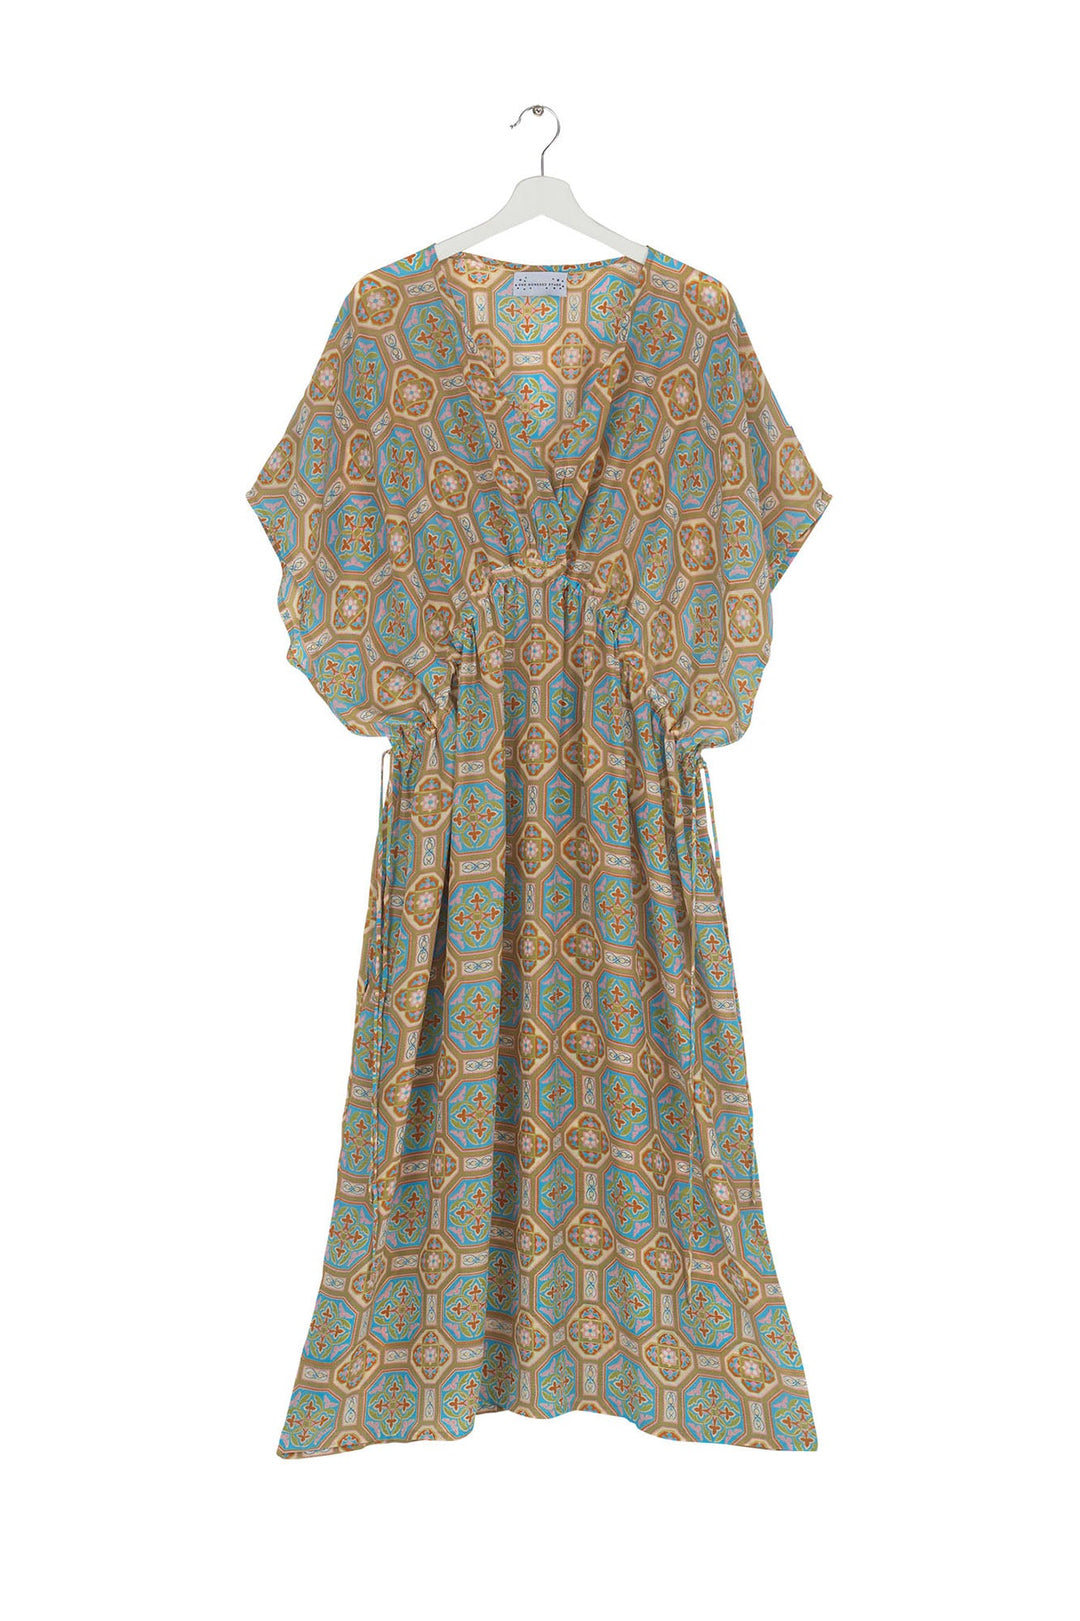 Women's lightweight beach cover up dress in vintage tiles blue print by One Hundred Stars